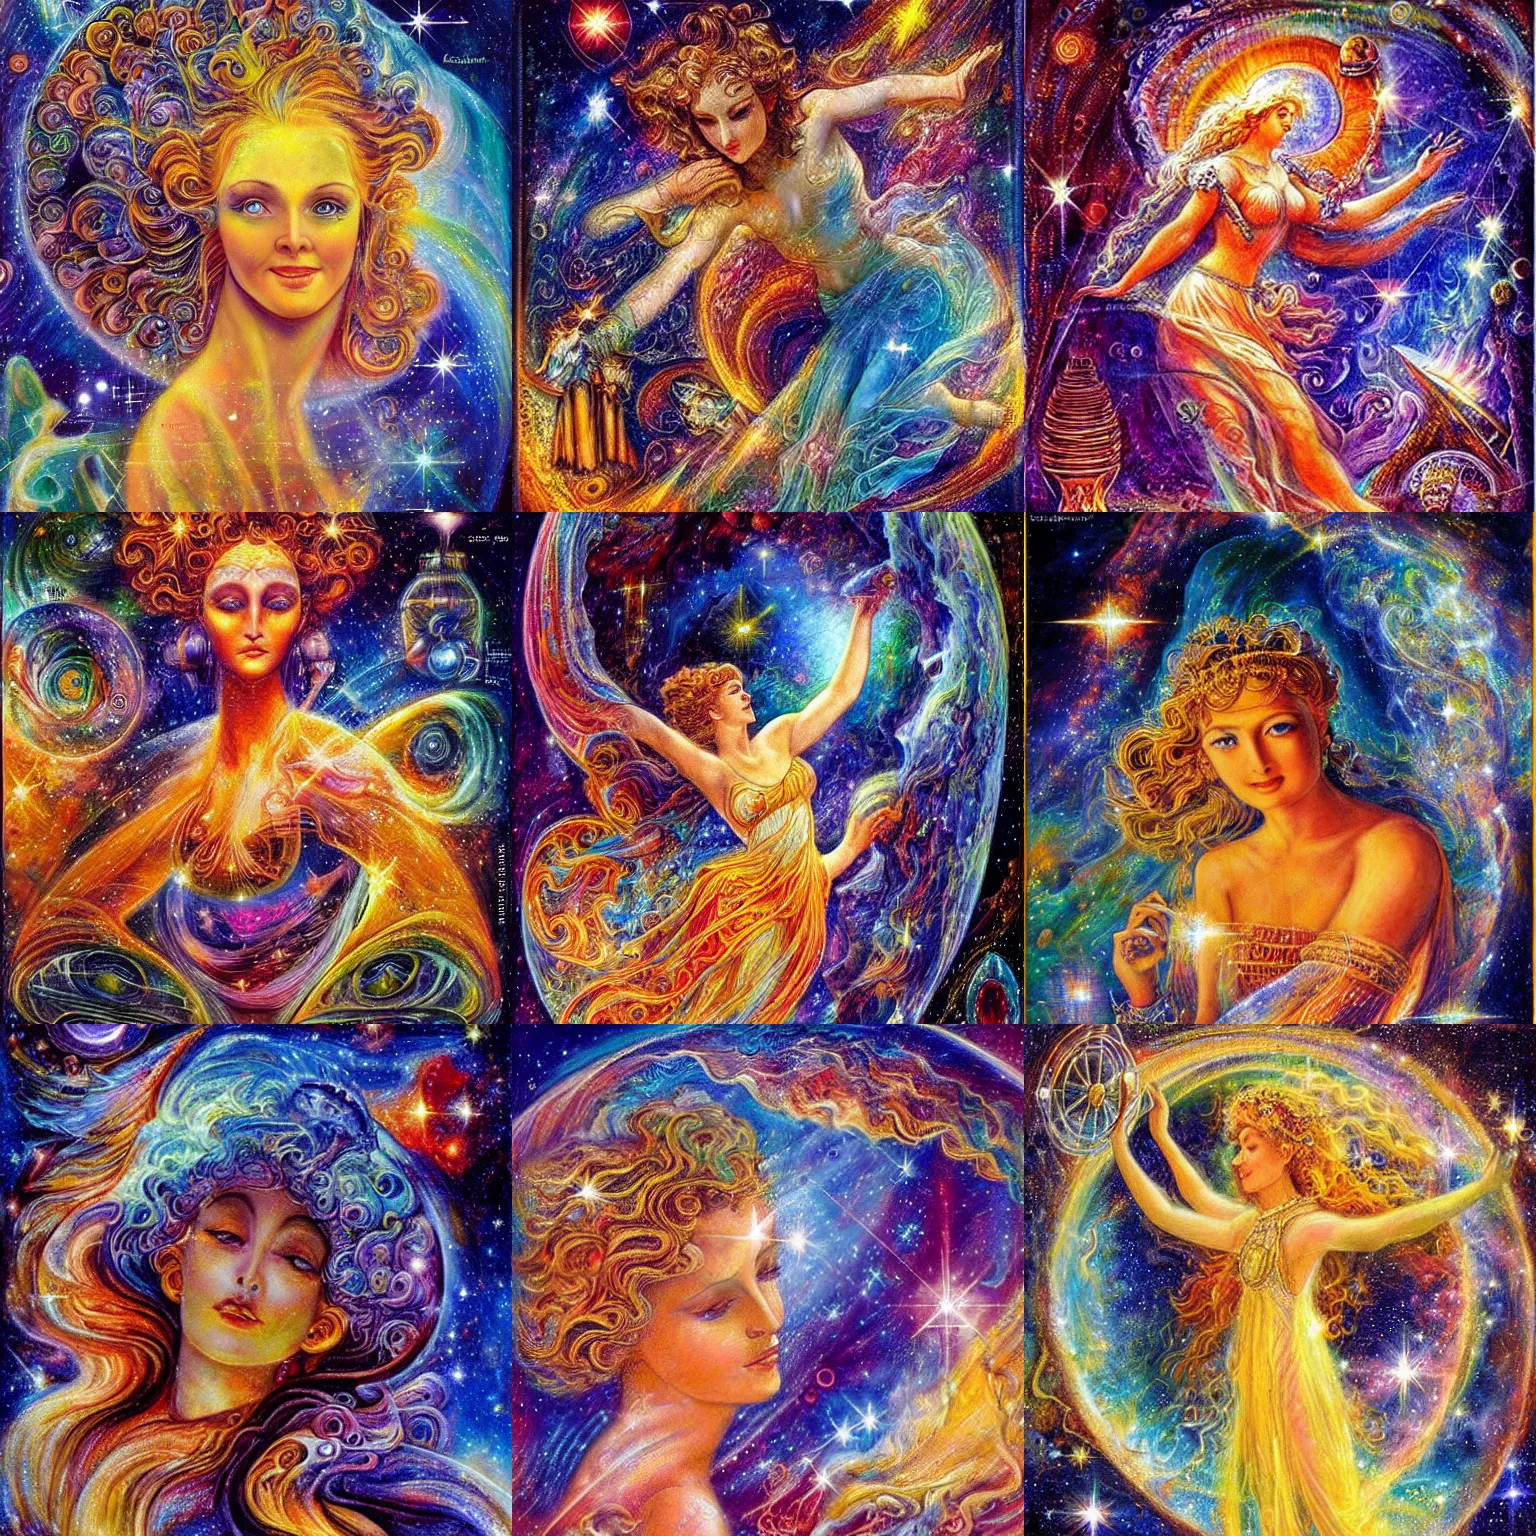 Prompt: goddess of hubble space telescope images by josephine wall